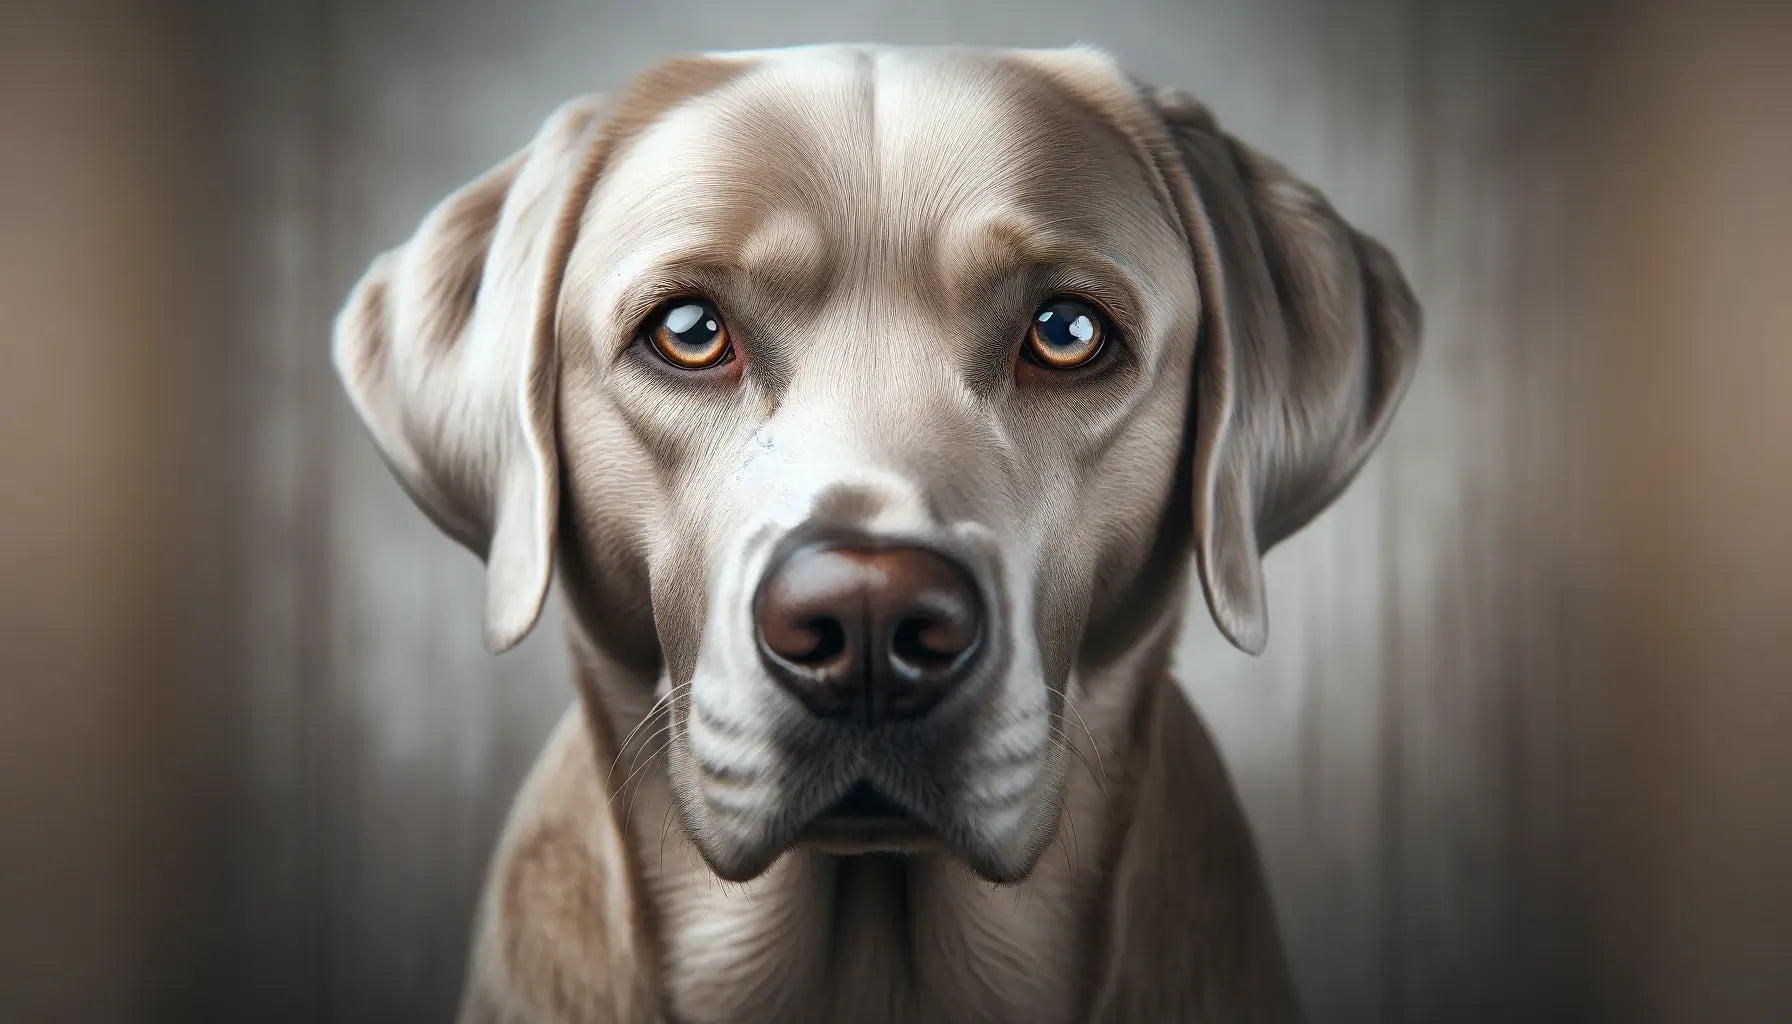 A close-up of a Silver Lab, capturing its soulful eyes and watchful gaze.